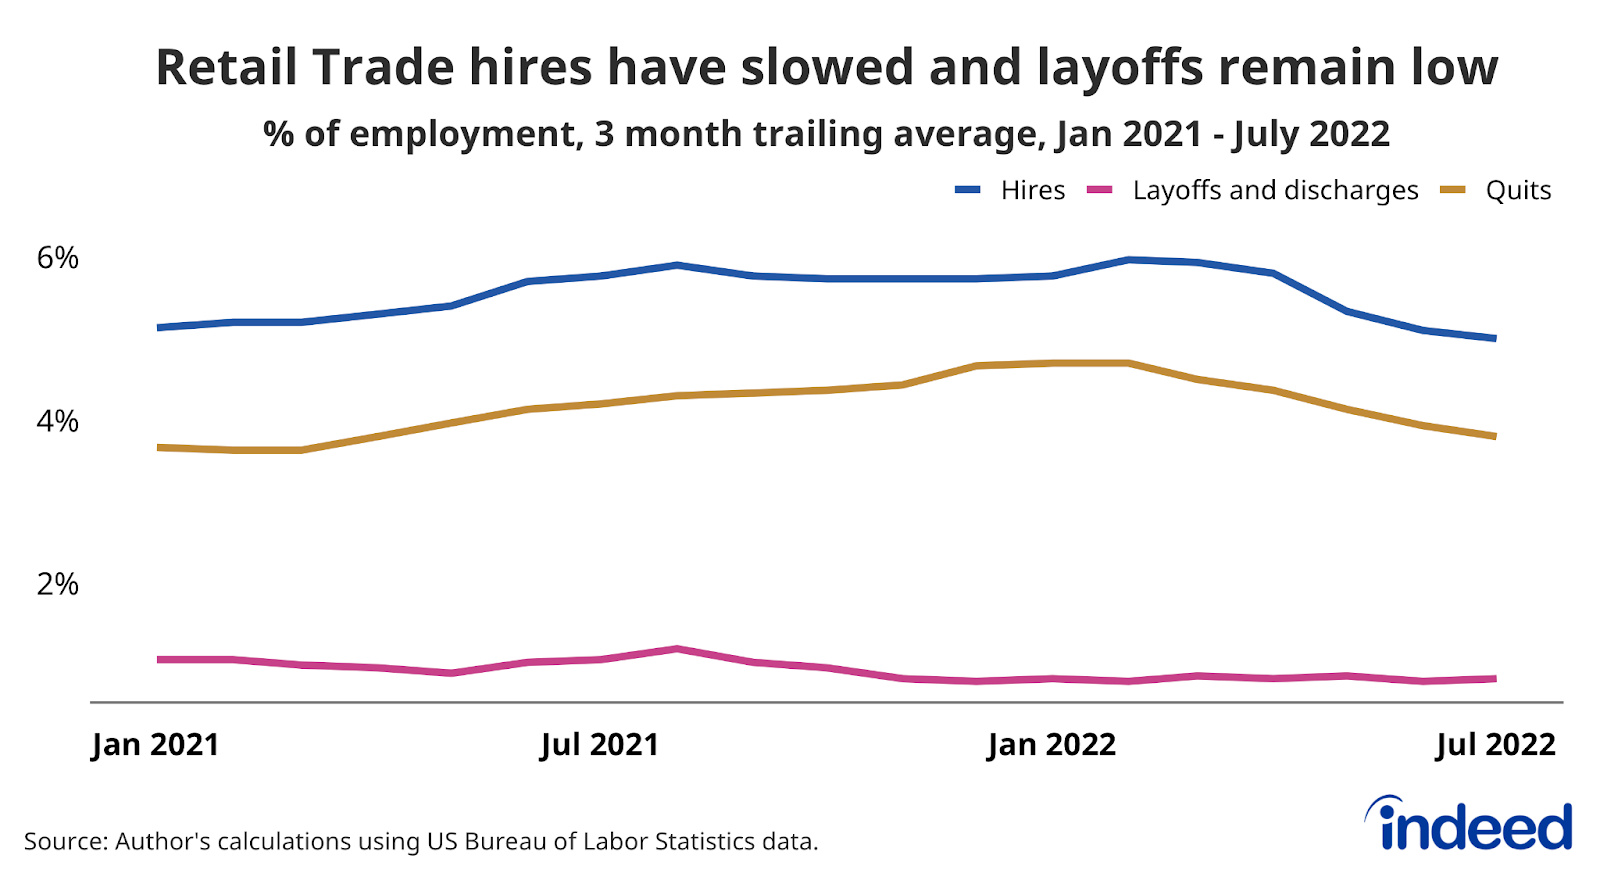 Line graph titled “Retail Trade hires have slowed and layoffs remain low.”